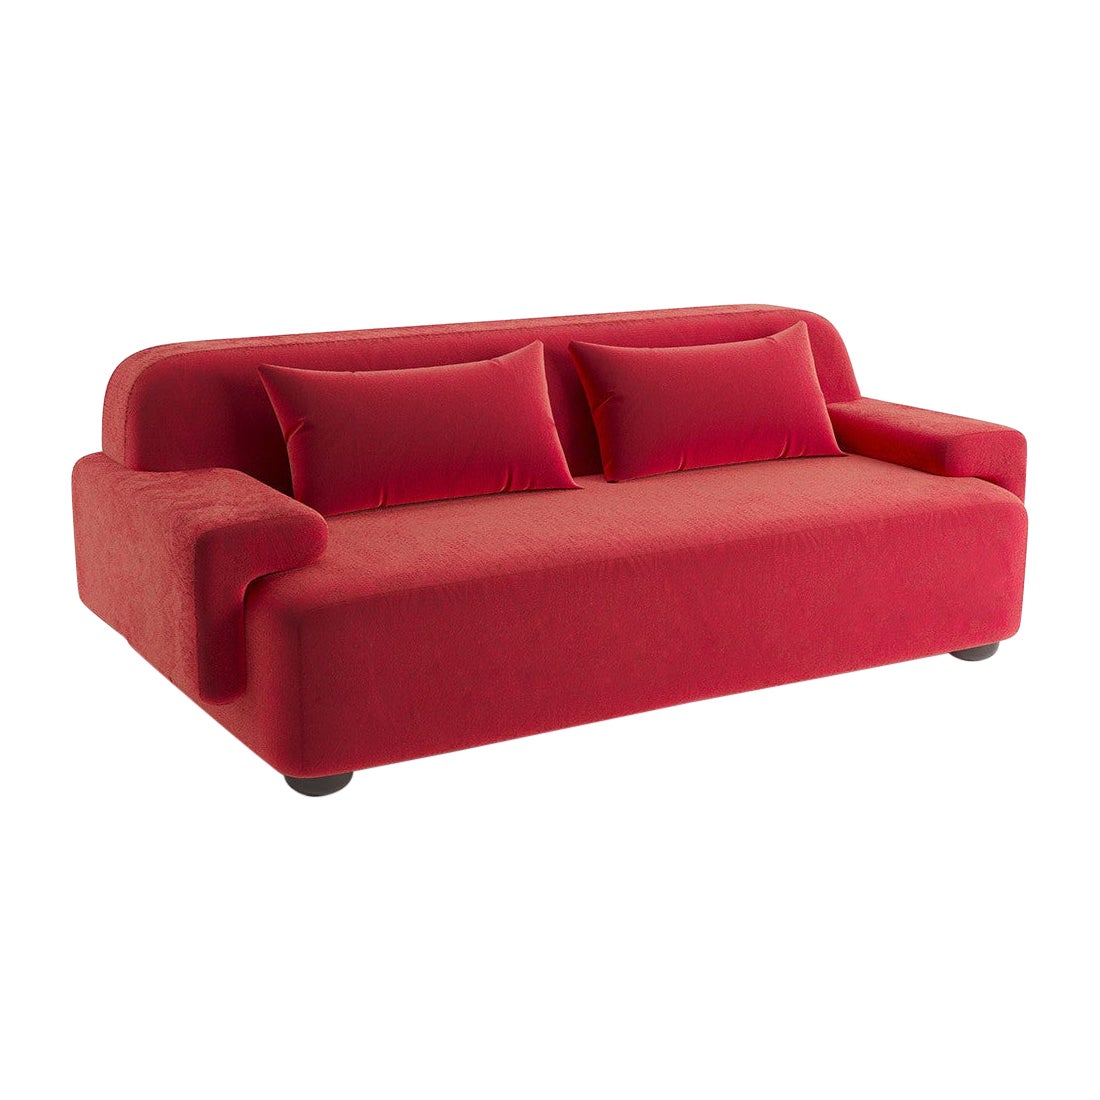 Popus Editions Lena 3 Seater Sofa in Red Verone Velvet Upholstery For Sale